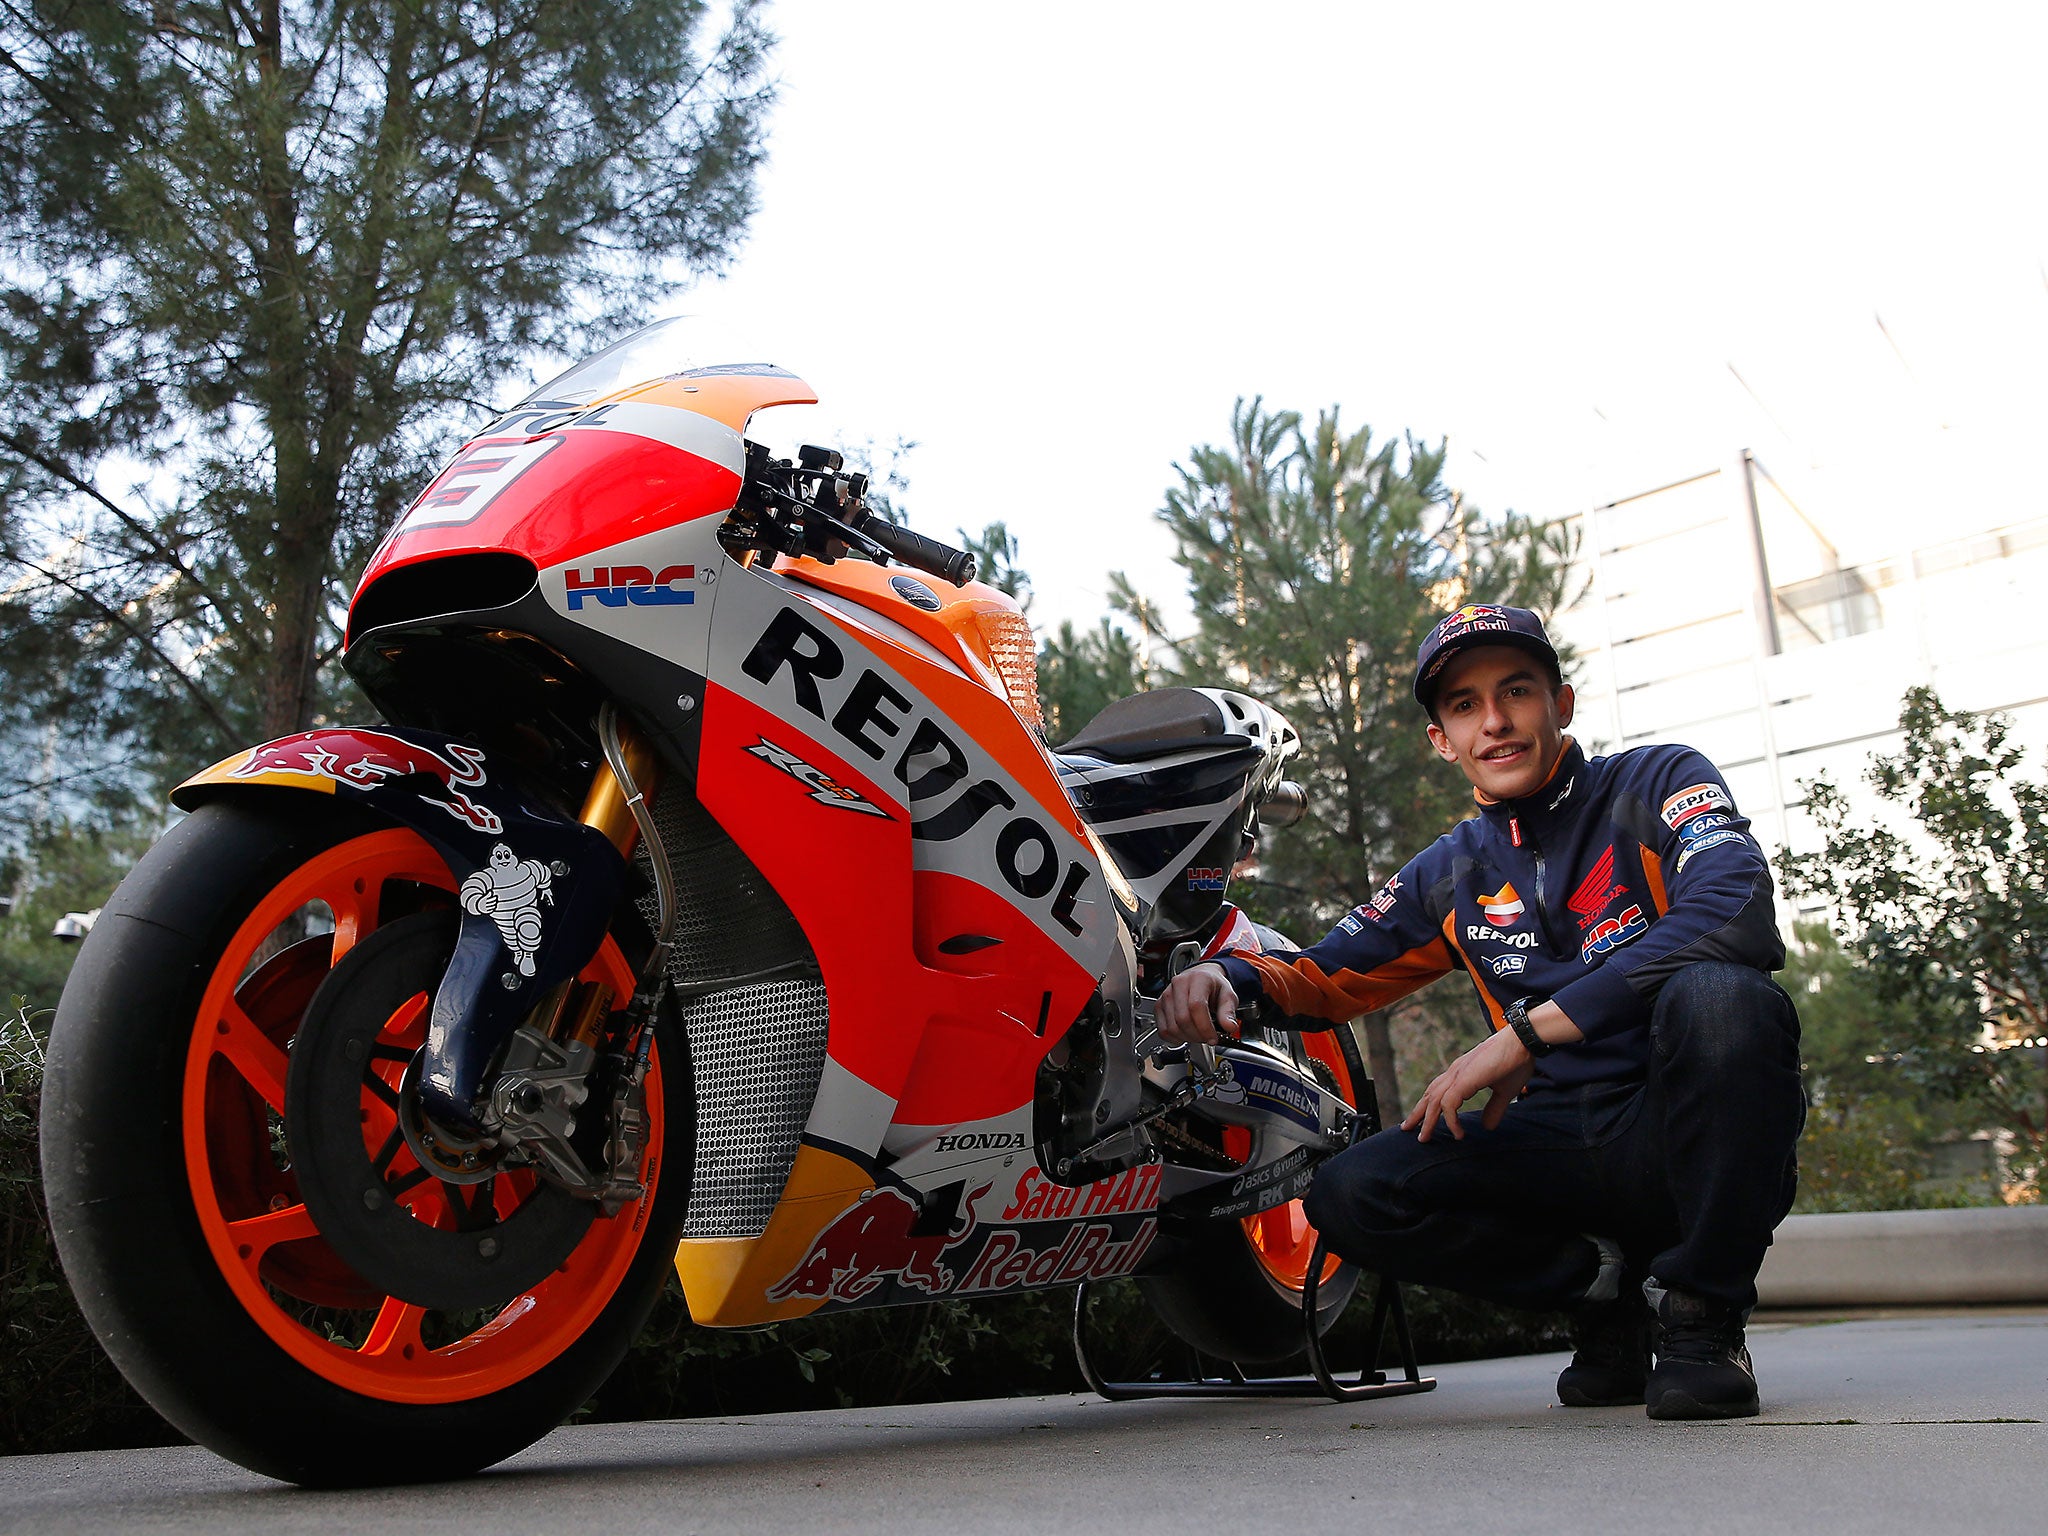 Marquez will attempt to retain his world championship with Repsol Honda in 2017